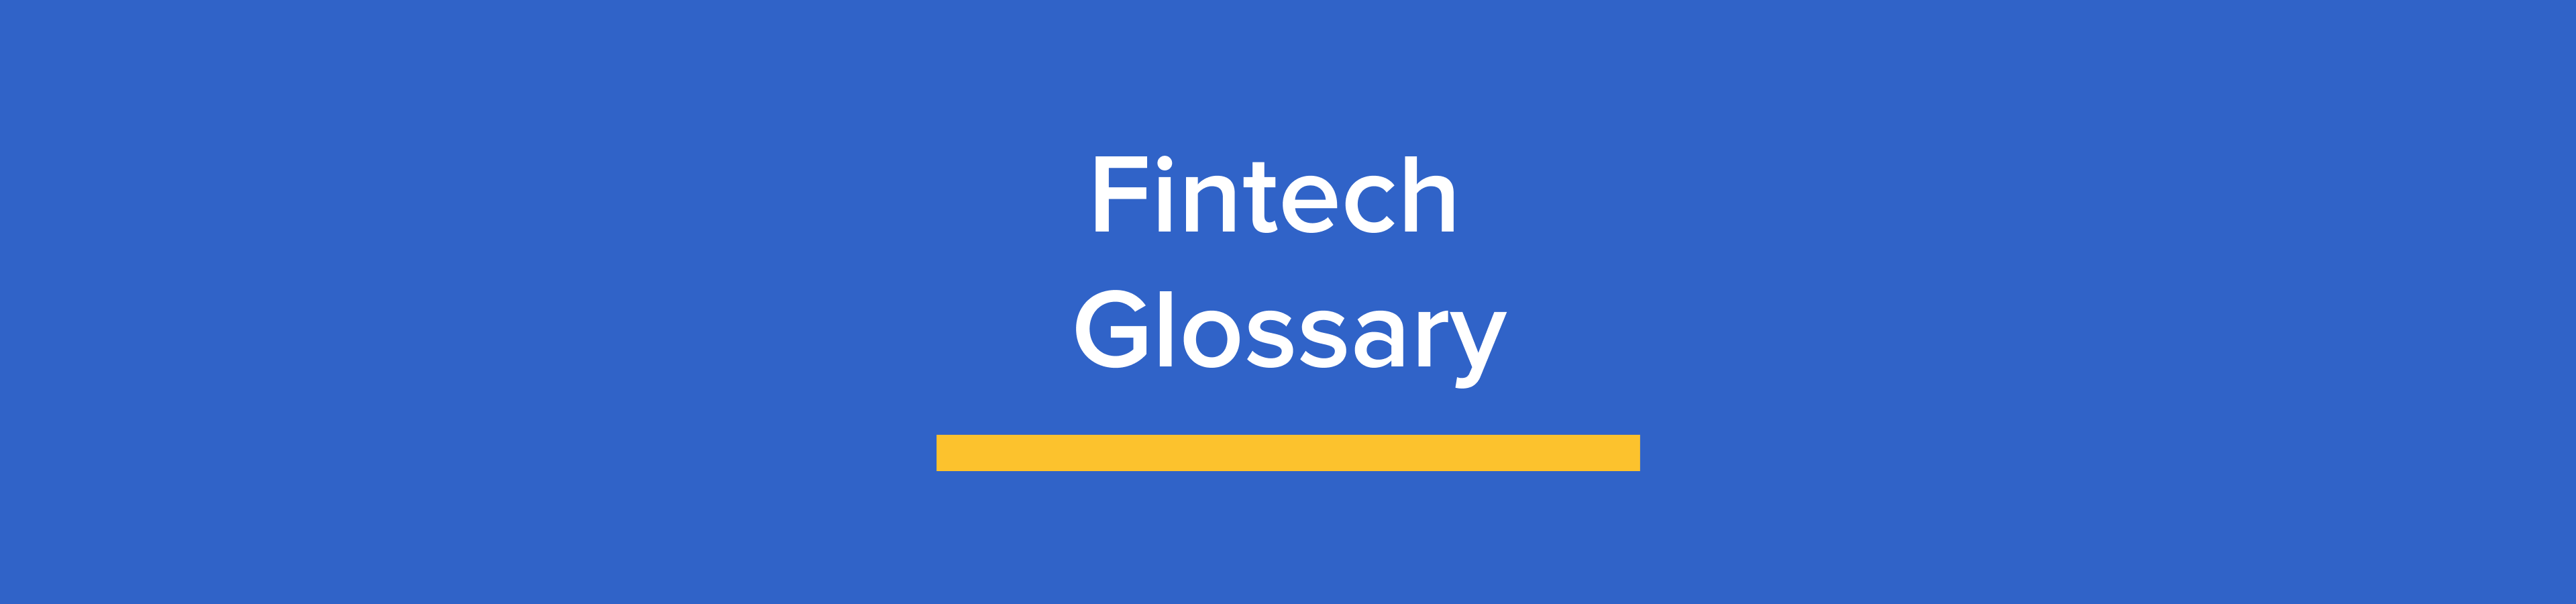 Fintech glossary: Key business finance terms explained